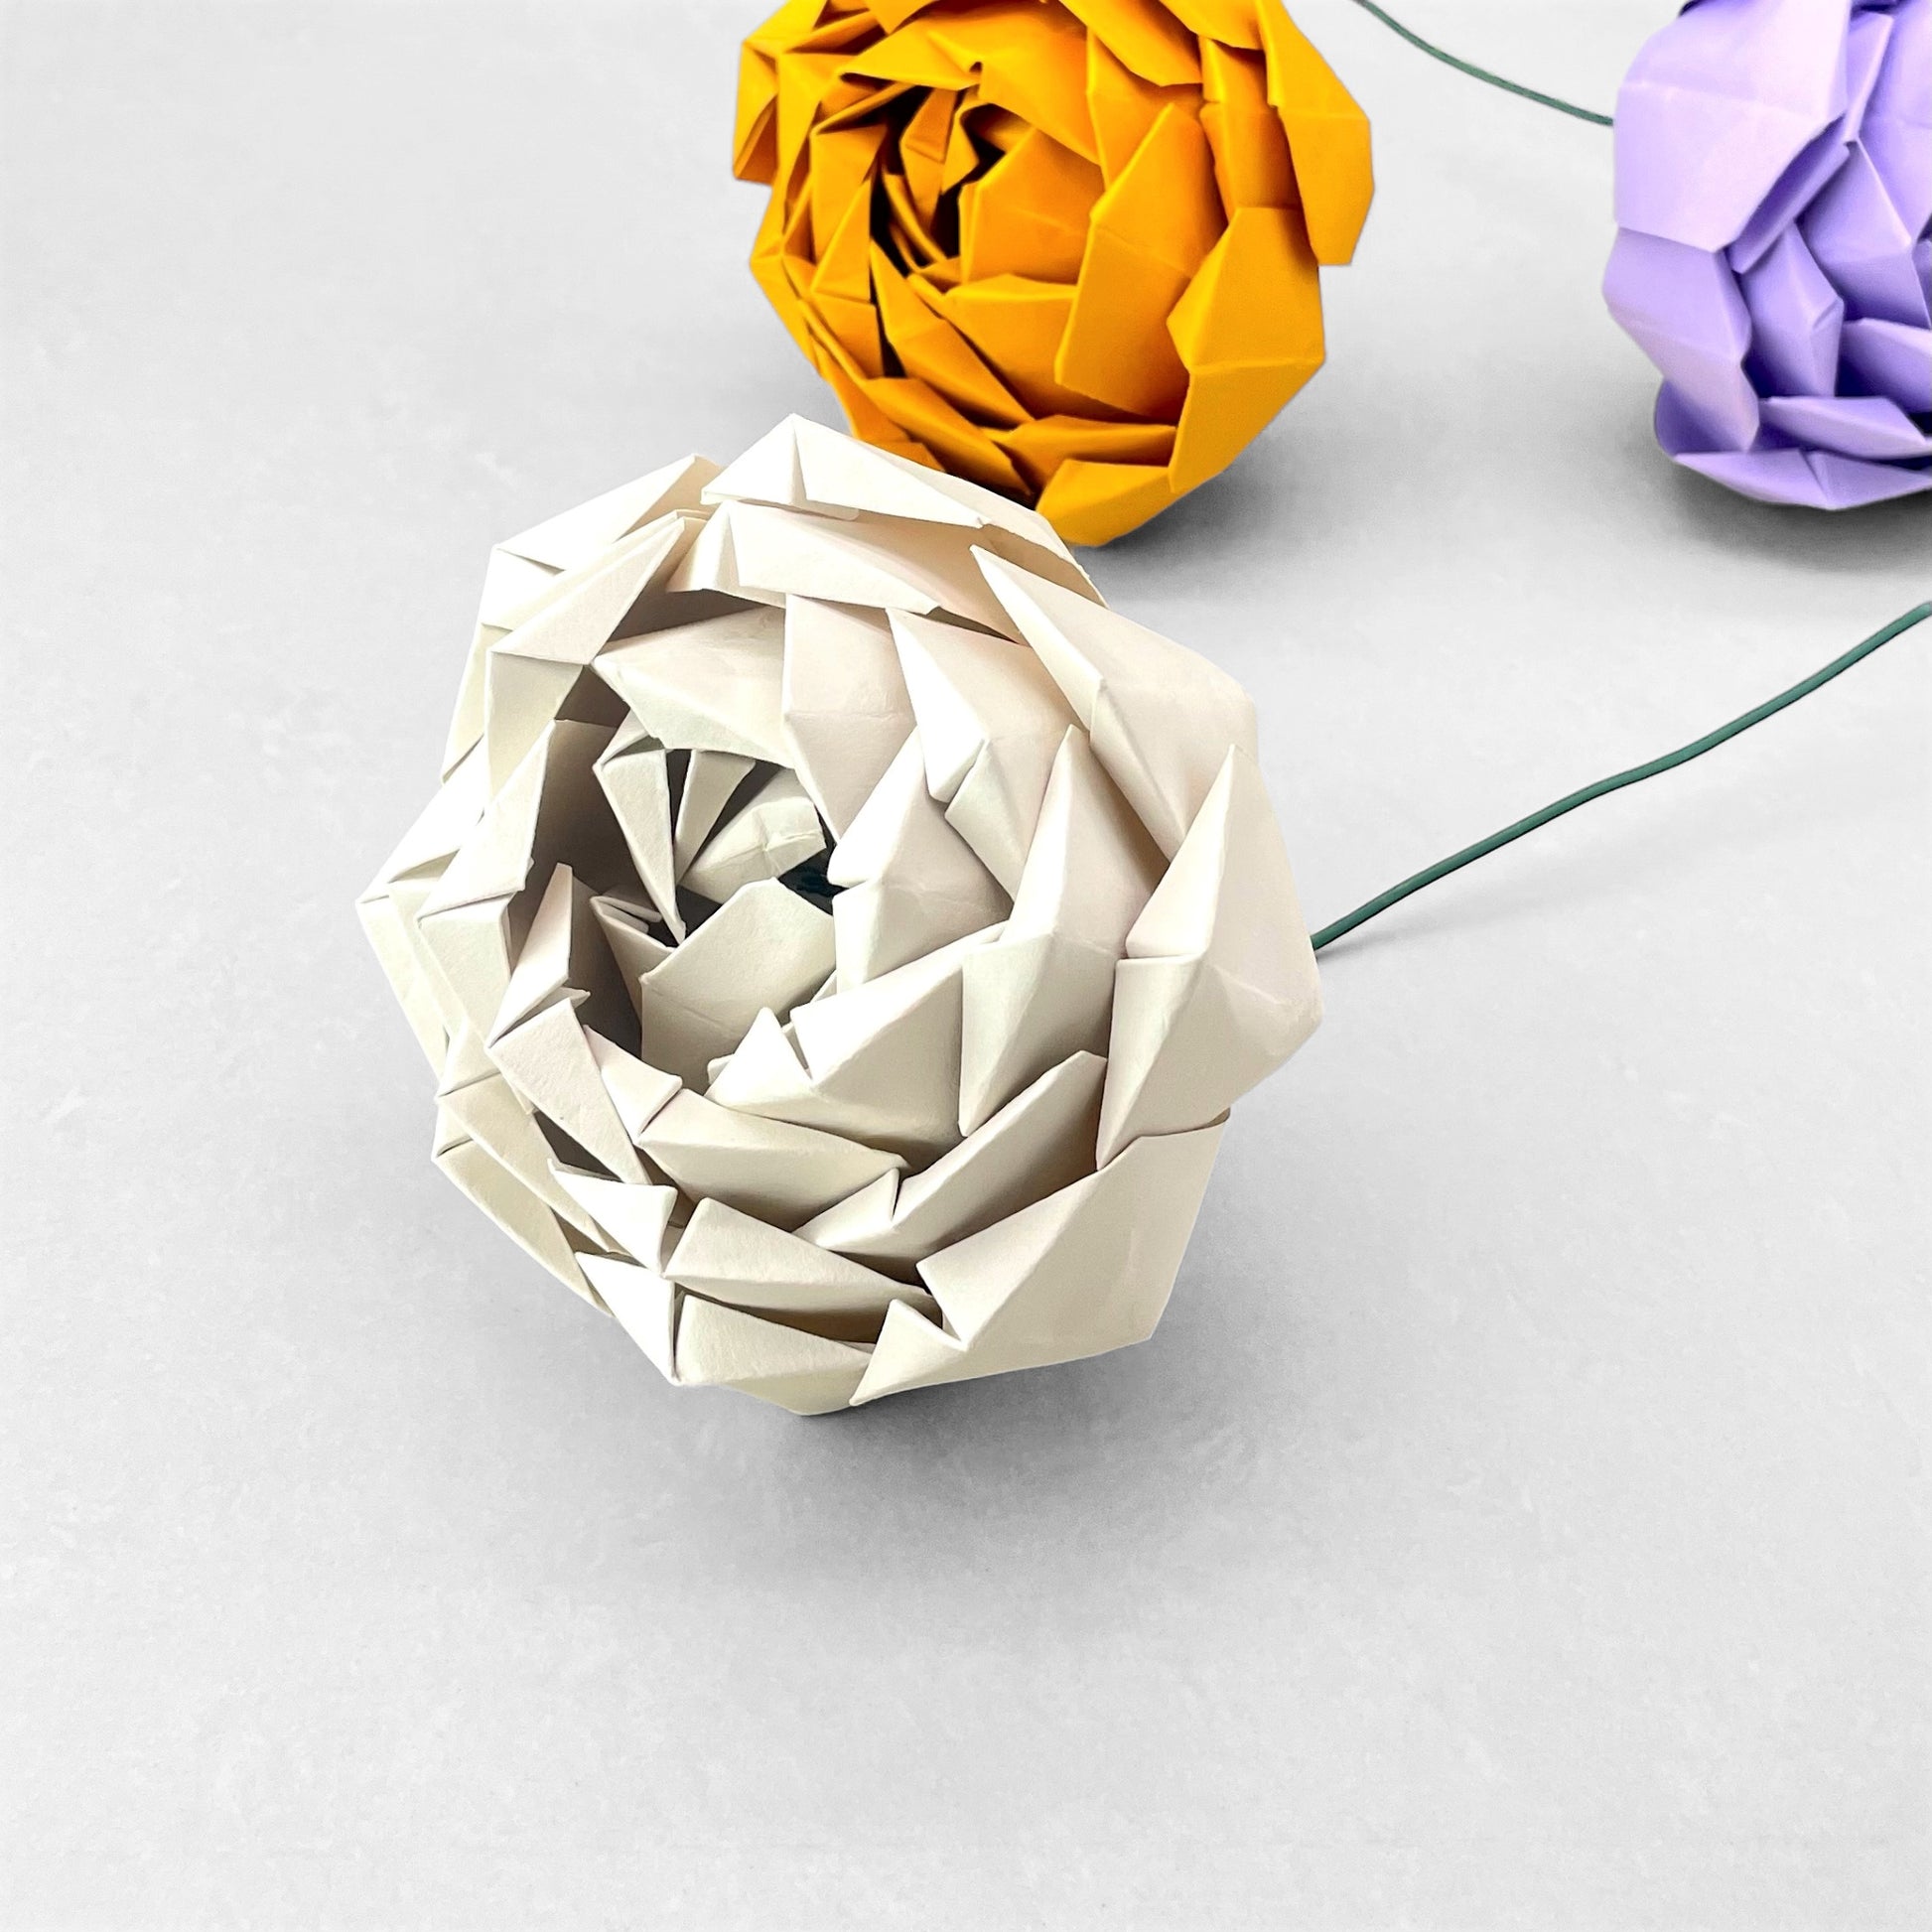 A paper craft kit by Origami Est to create 3 paper peonies.  Peonies are pictured in cream, mustard and lilac